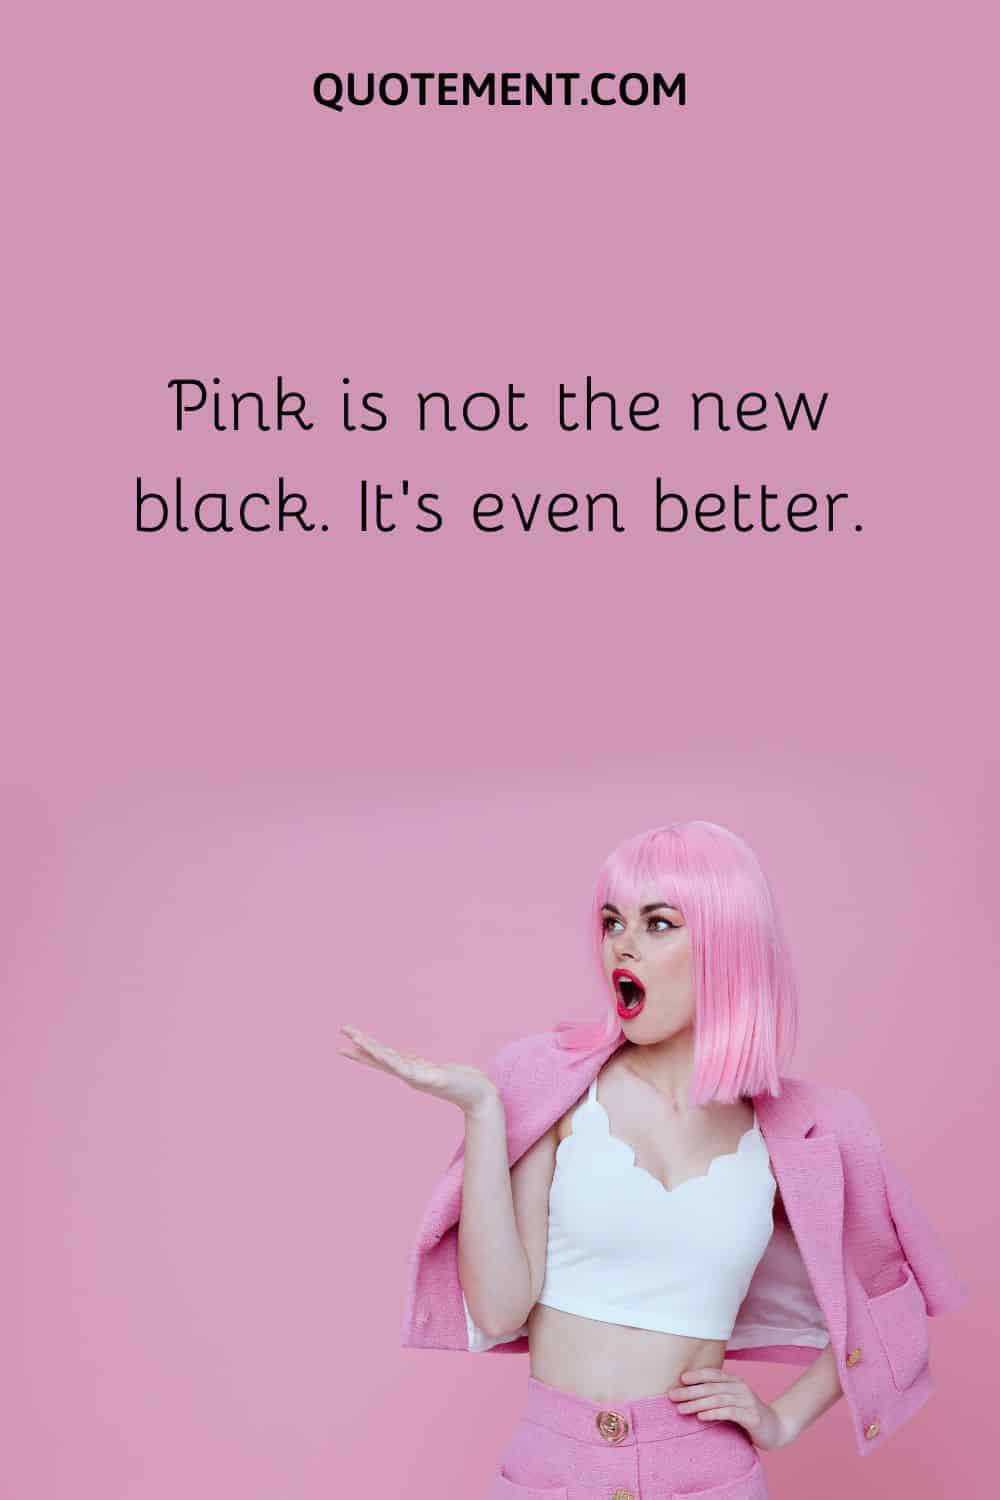 pink caption by a girl with pink hair
